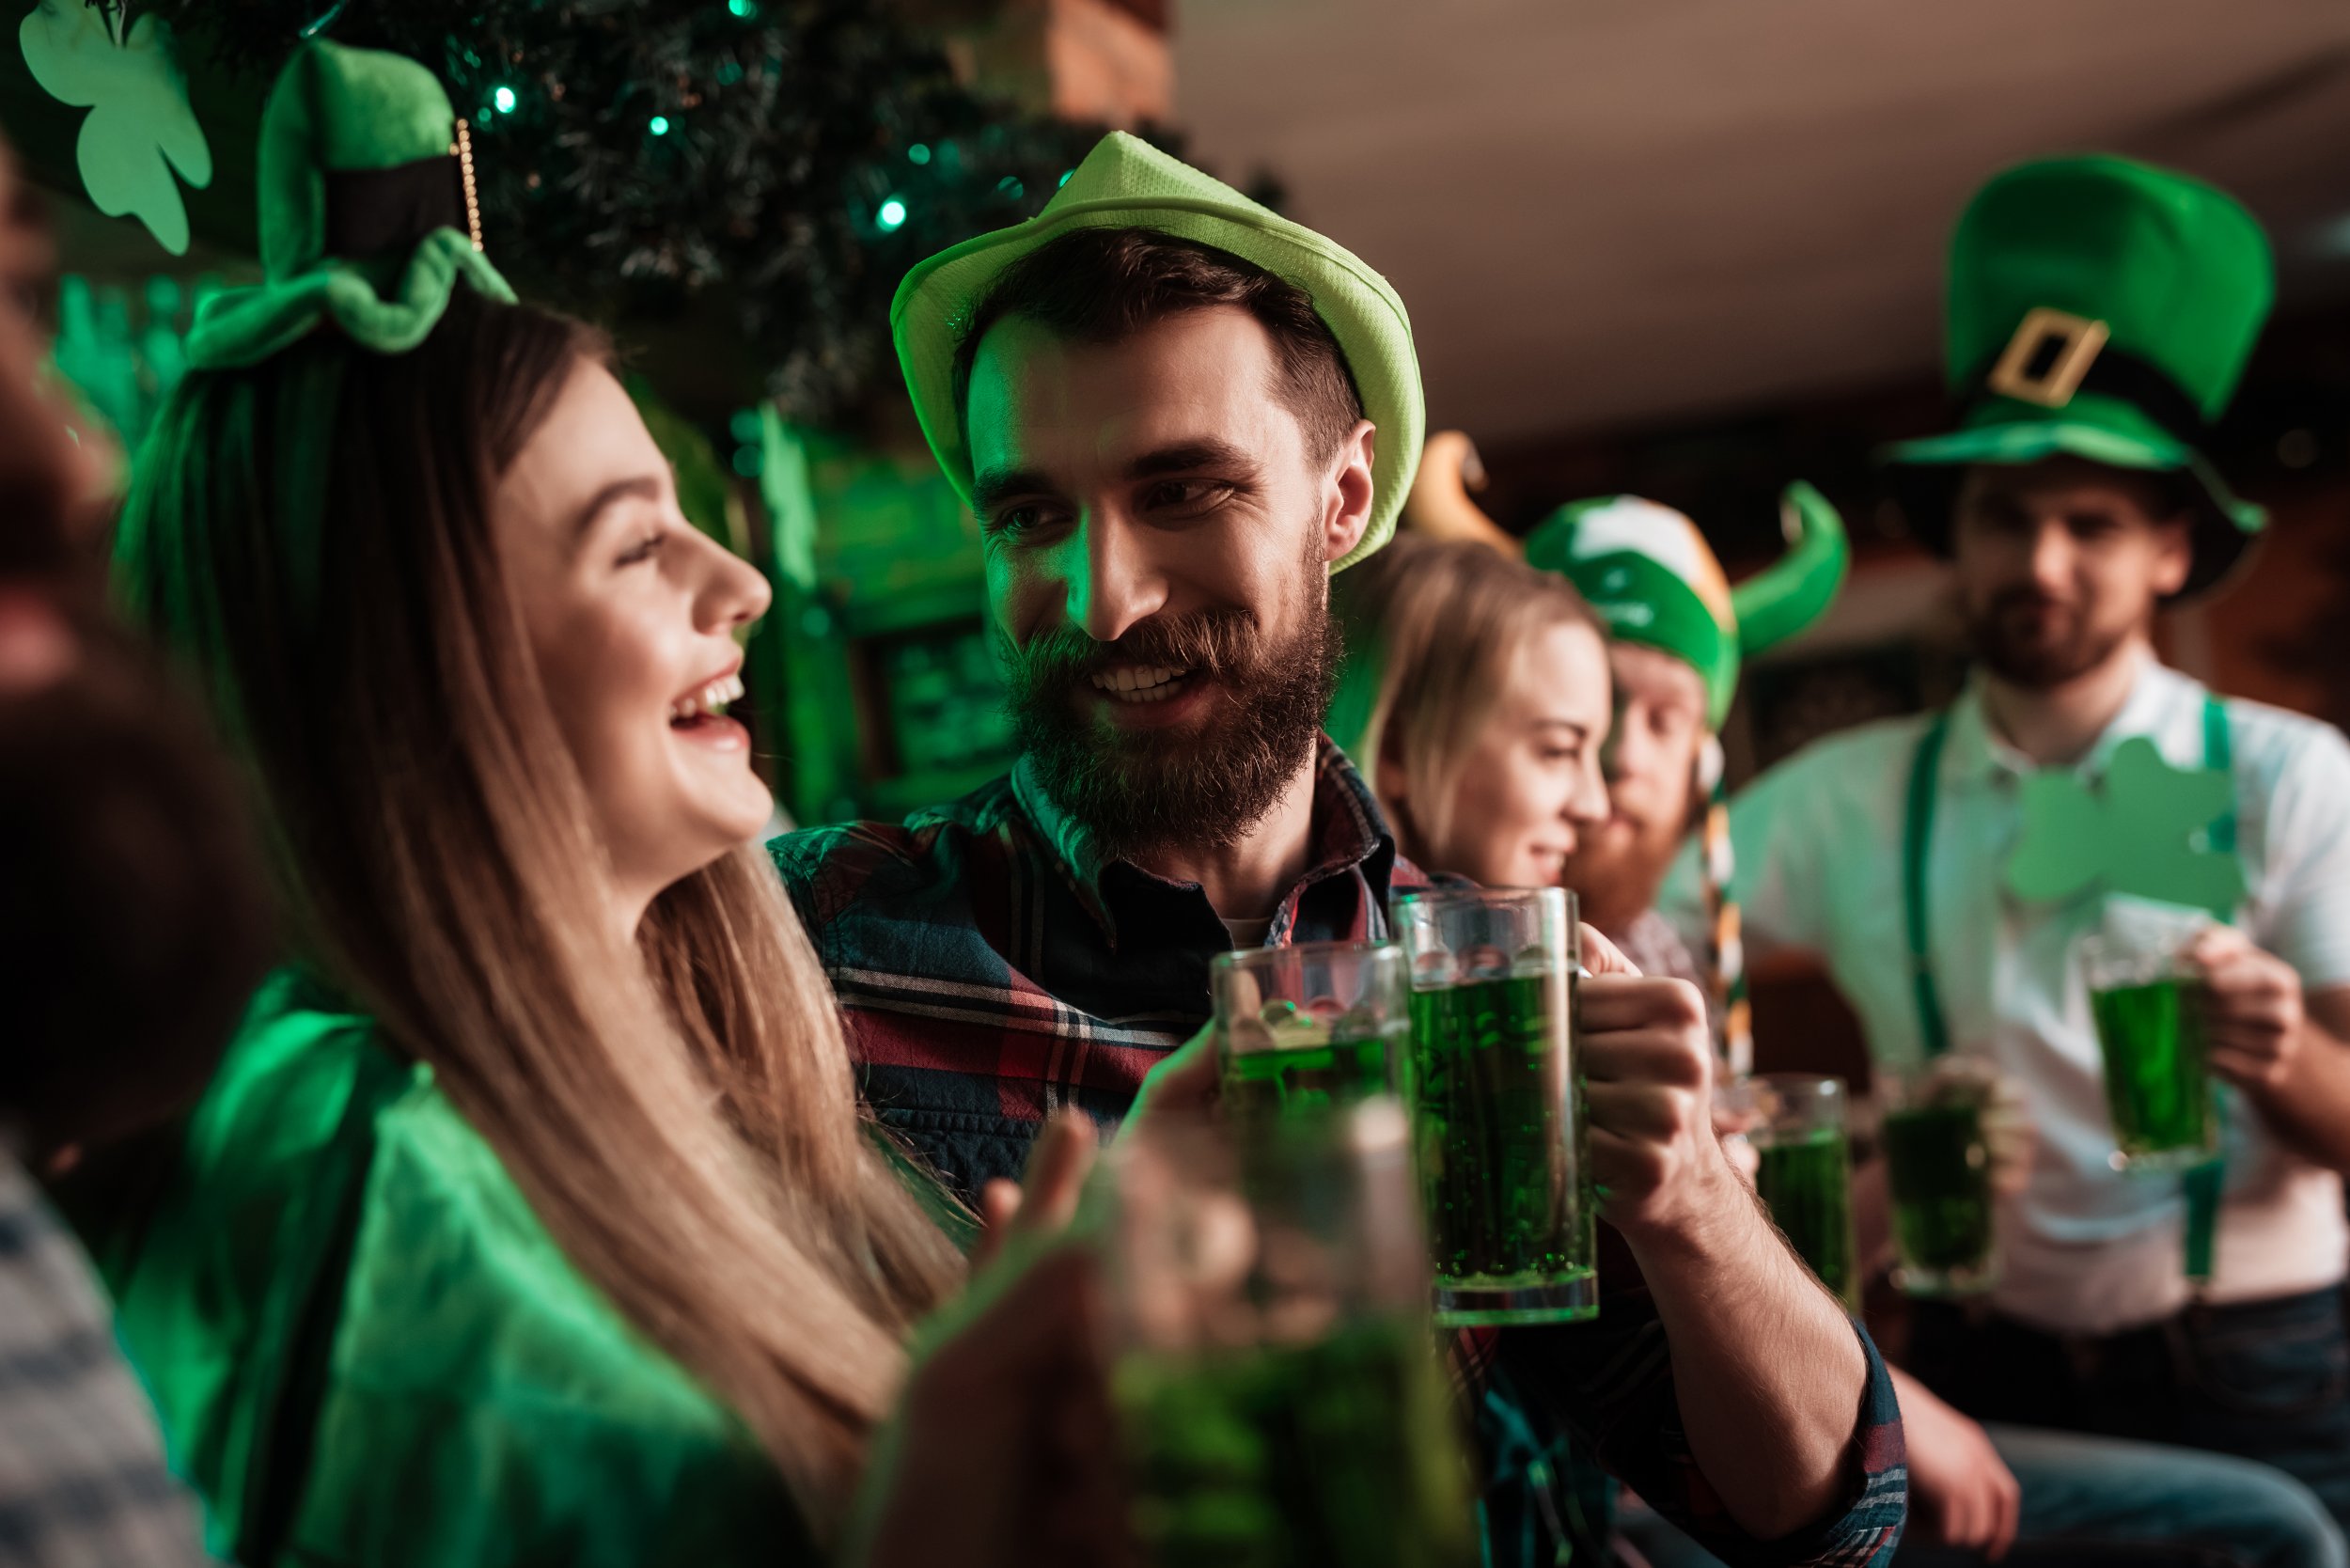 The Complete Guide to St. Patrick's Day in Dublin